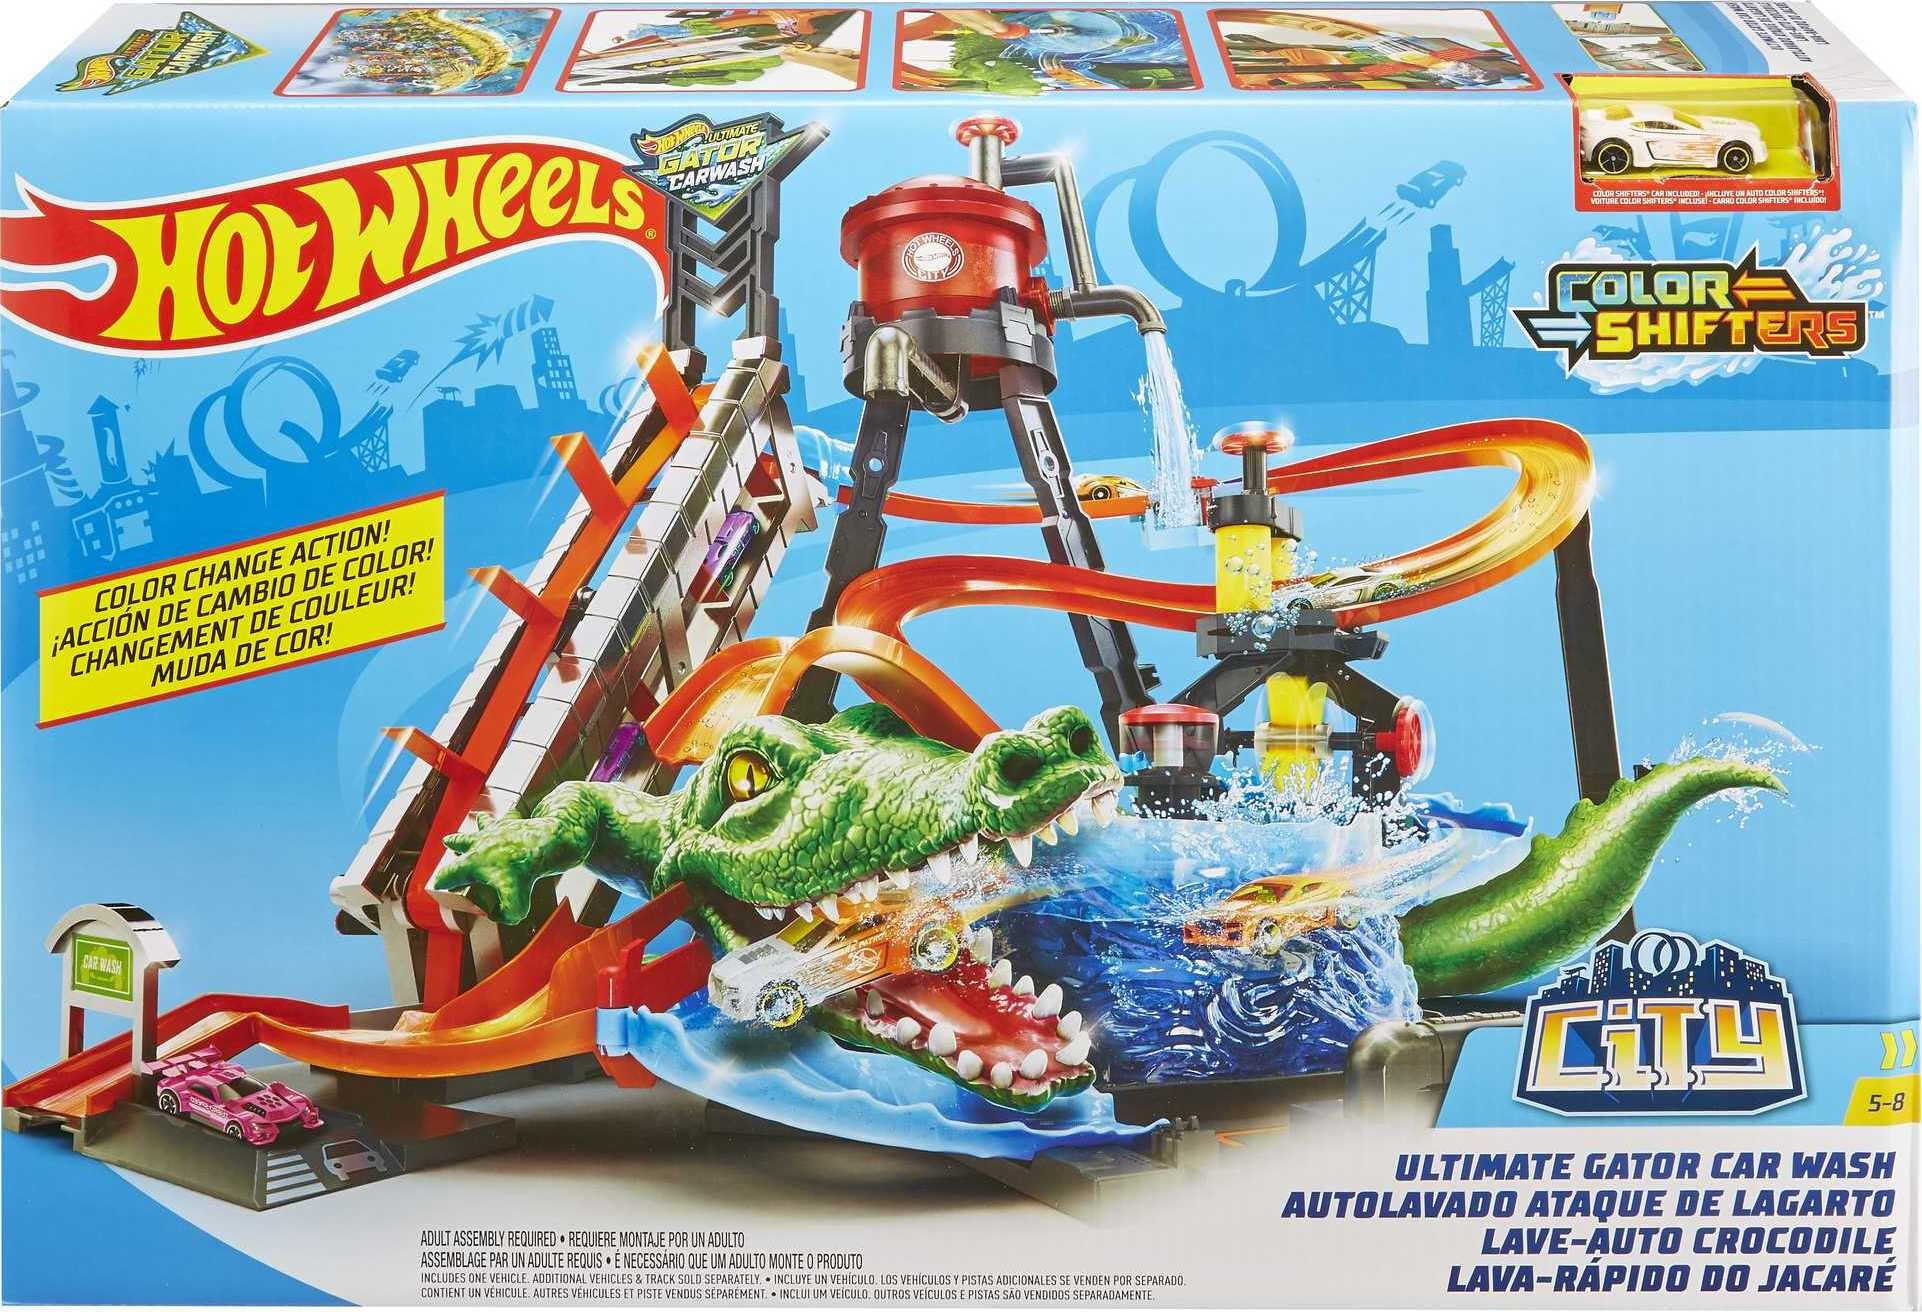 Hot Wheels Ultimate Gator Car Wash Playset with Color Shifters Toy Car in 1:64 Scale - image 7 of 7